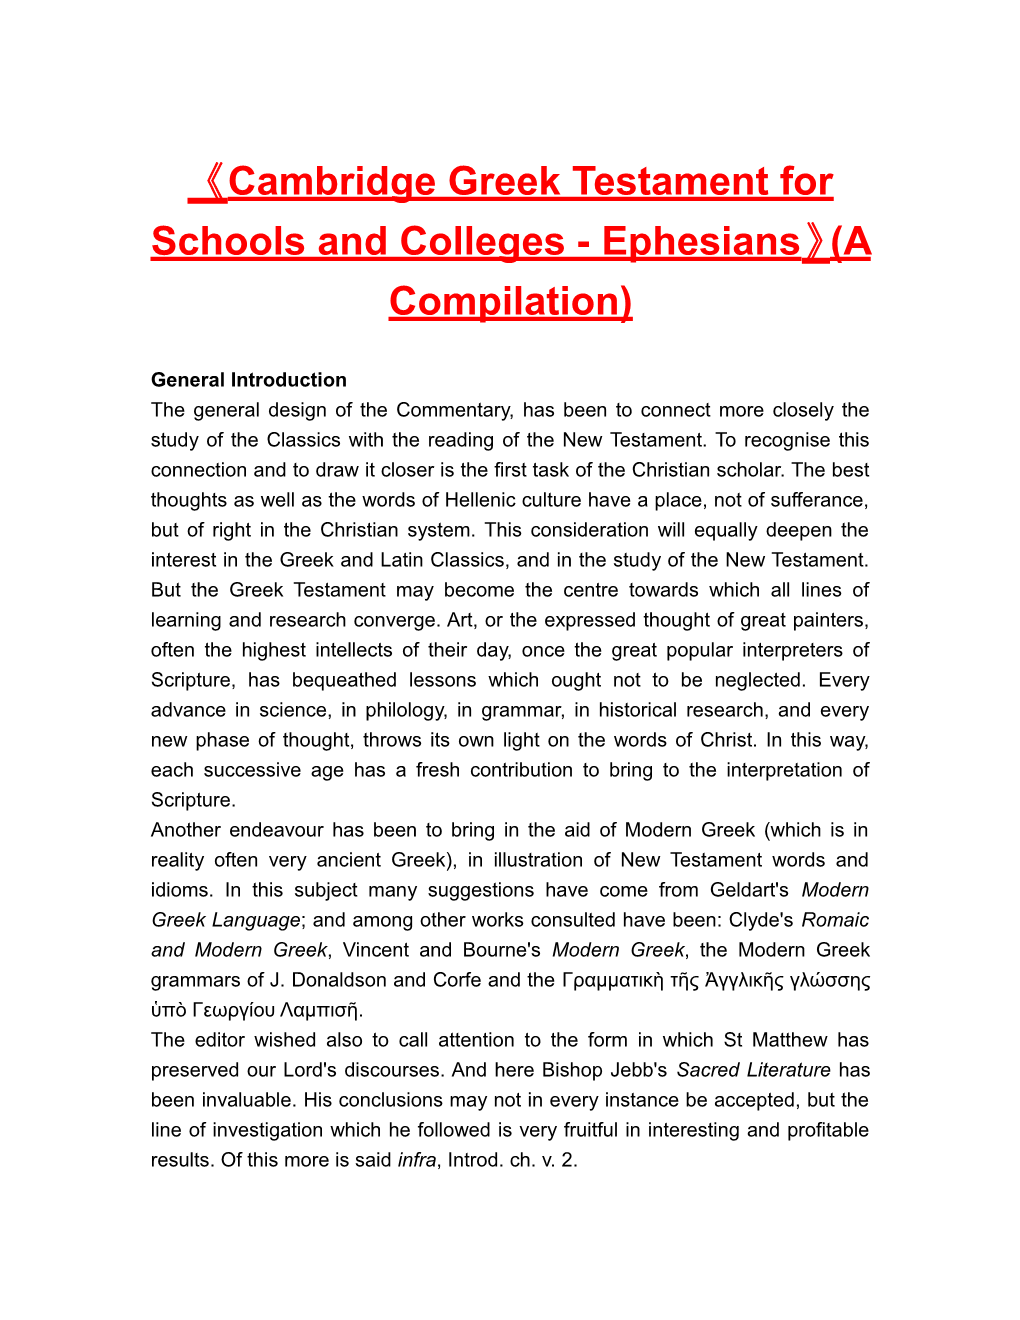 Cambridgegreek Testament for Schools and Colleges-Ephesians (A Compilation)